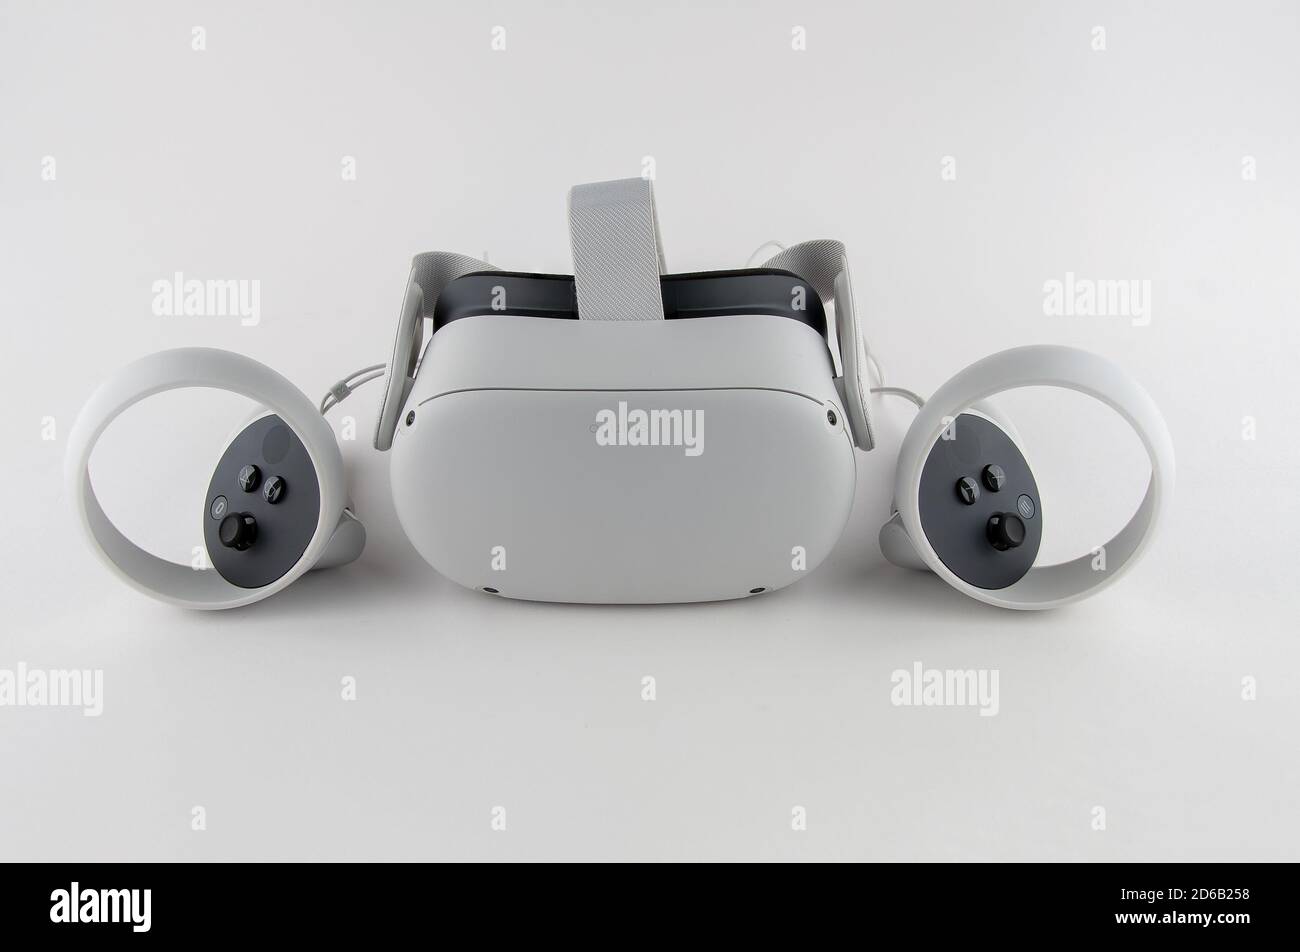 CHESTER, ENGLAND - OCTOBER 15, 2020: Oculus Quest 2 virtual reality headset Stock Photo